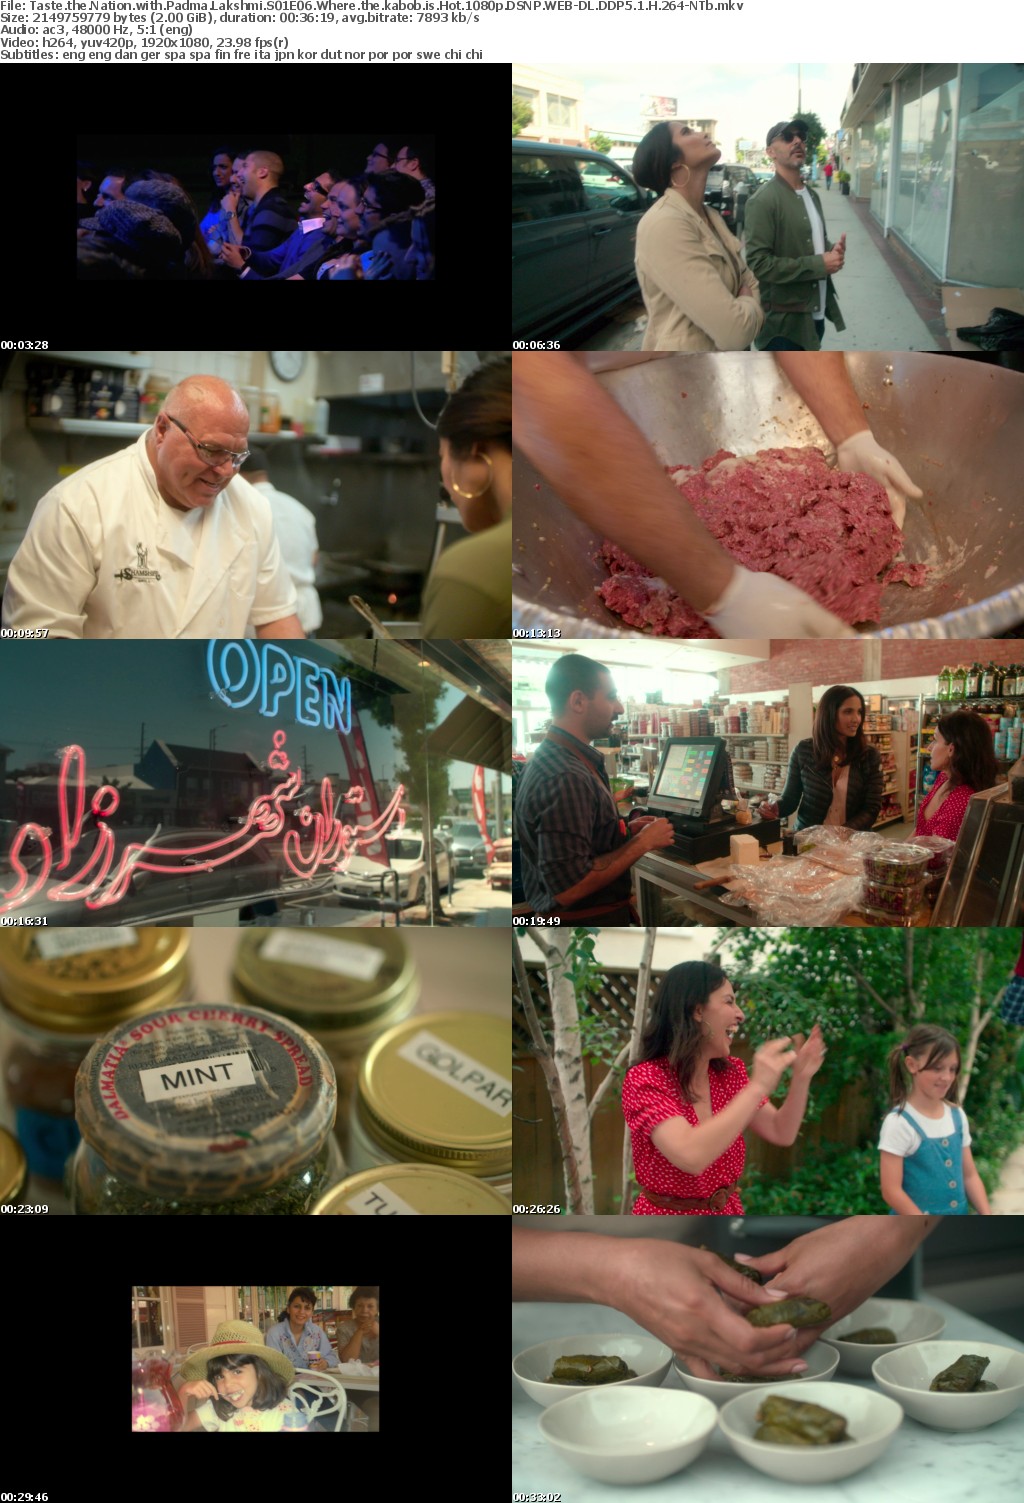 Taste the Nation with Padma Lakshmi S01E06 Where the kabob is Hot 1080p DSNP WEB-DL DDP5 1 H 264-NTb